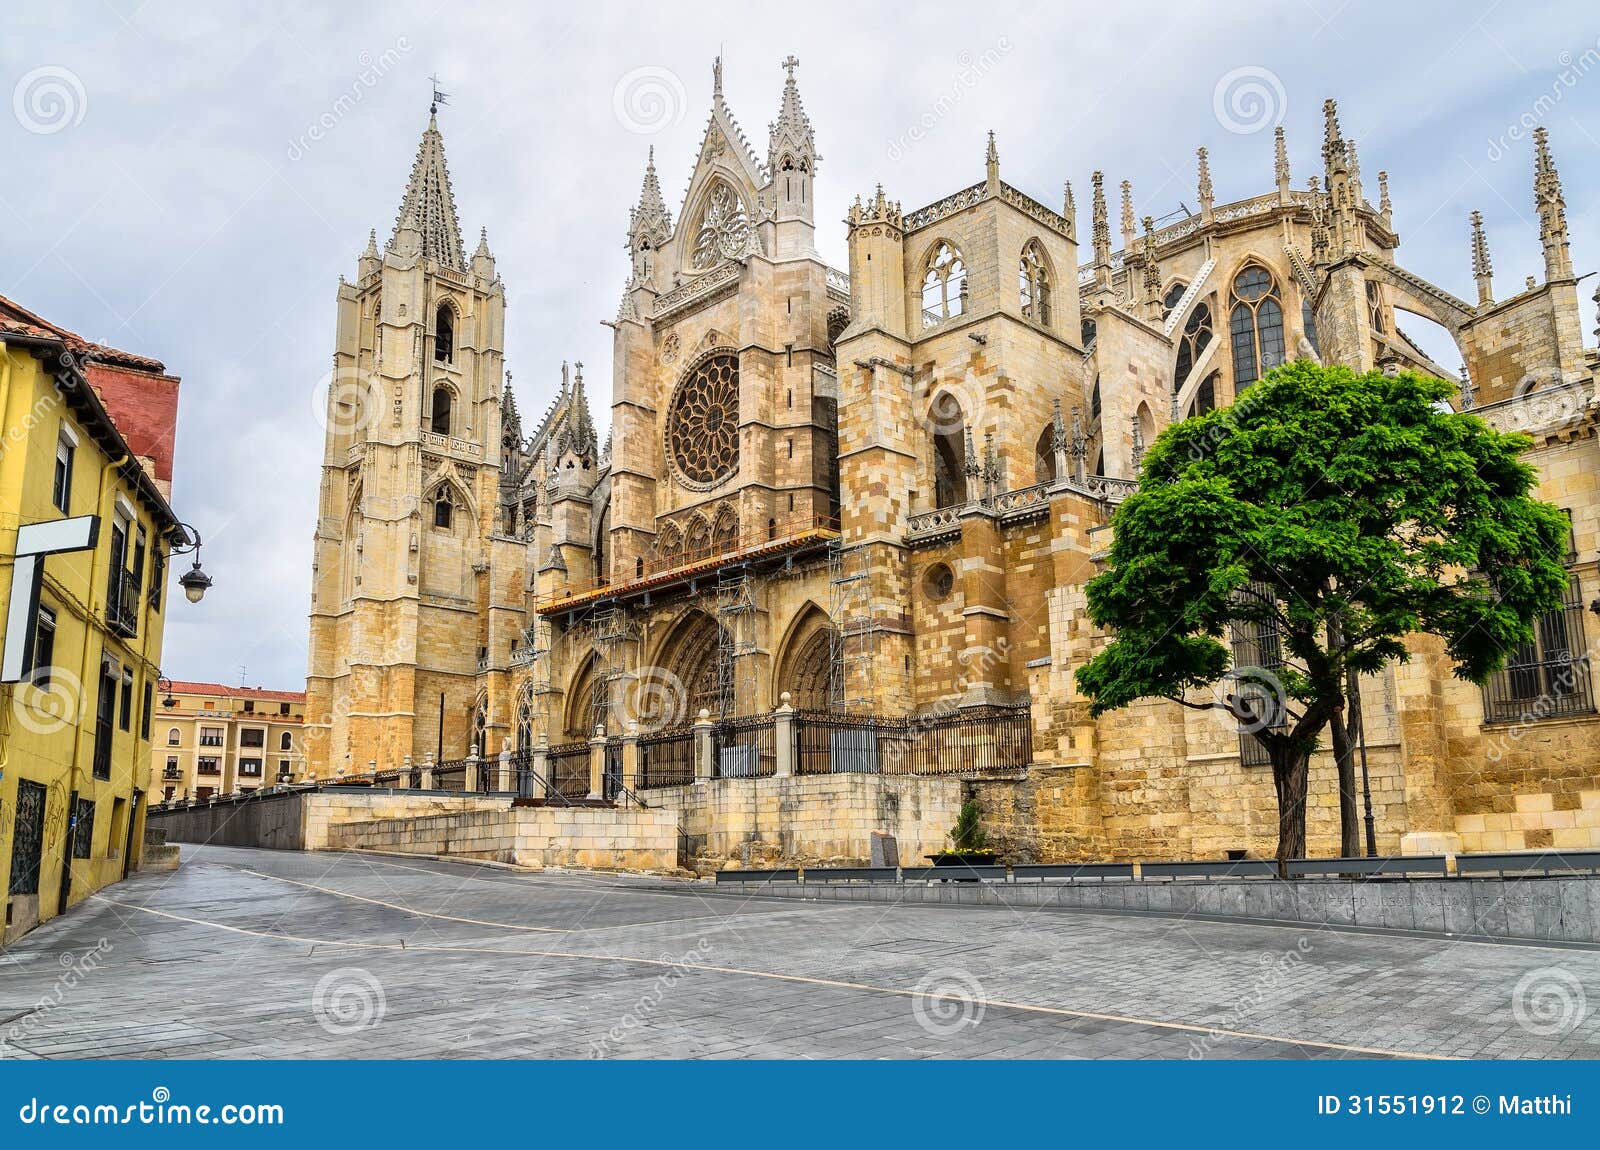 cathedral of leon, spain